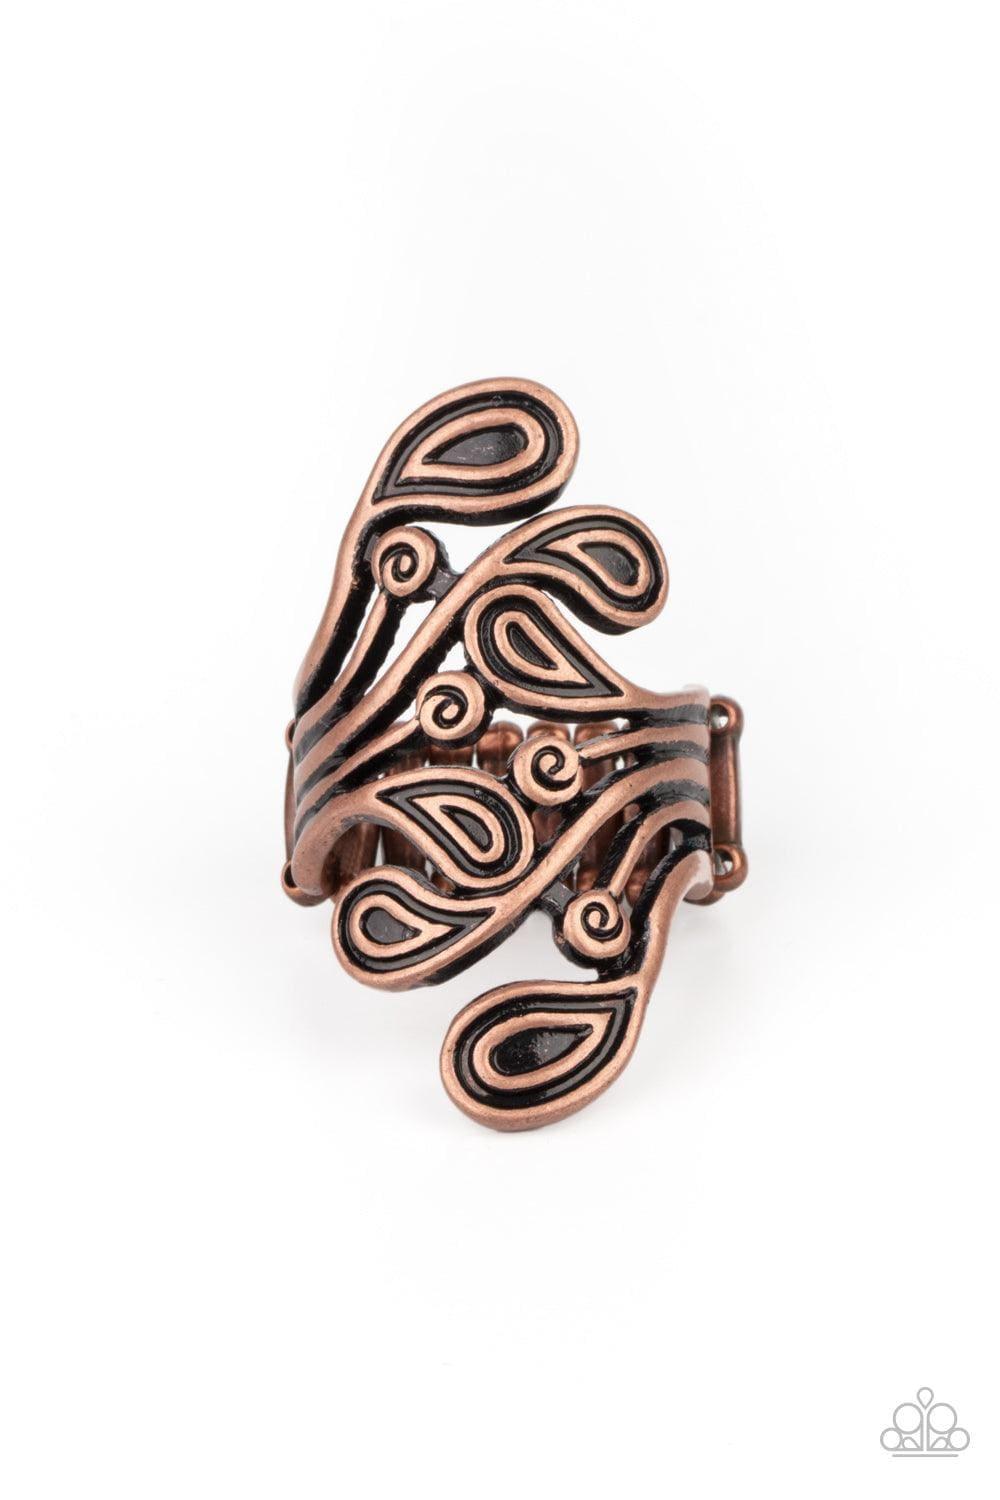 Paparazzi Accessories - Frill In The Blank - Copper Ring - Bling by JessieK